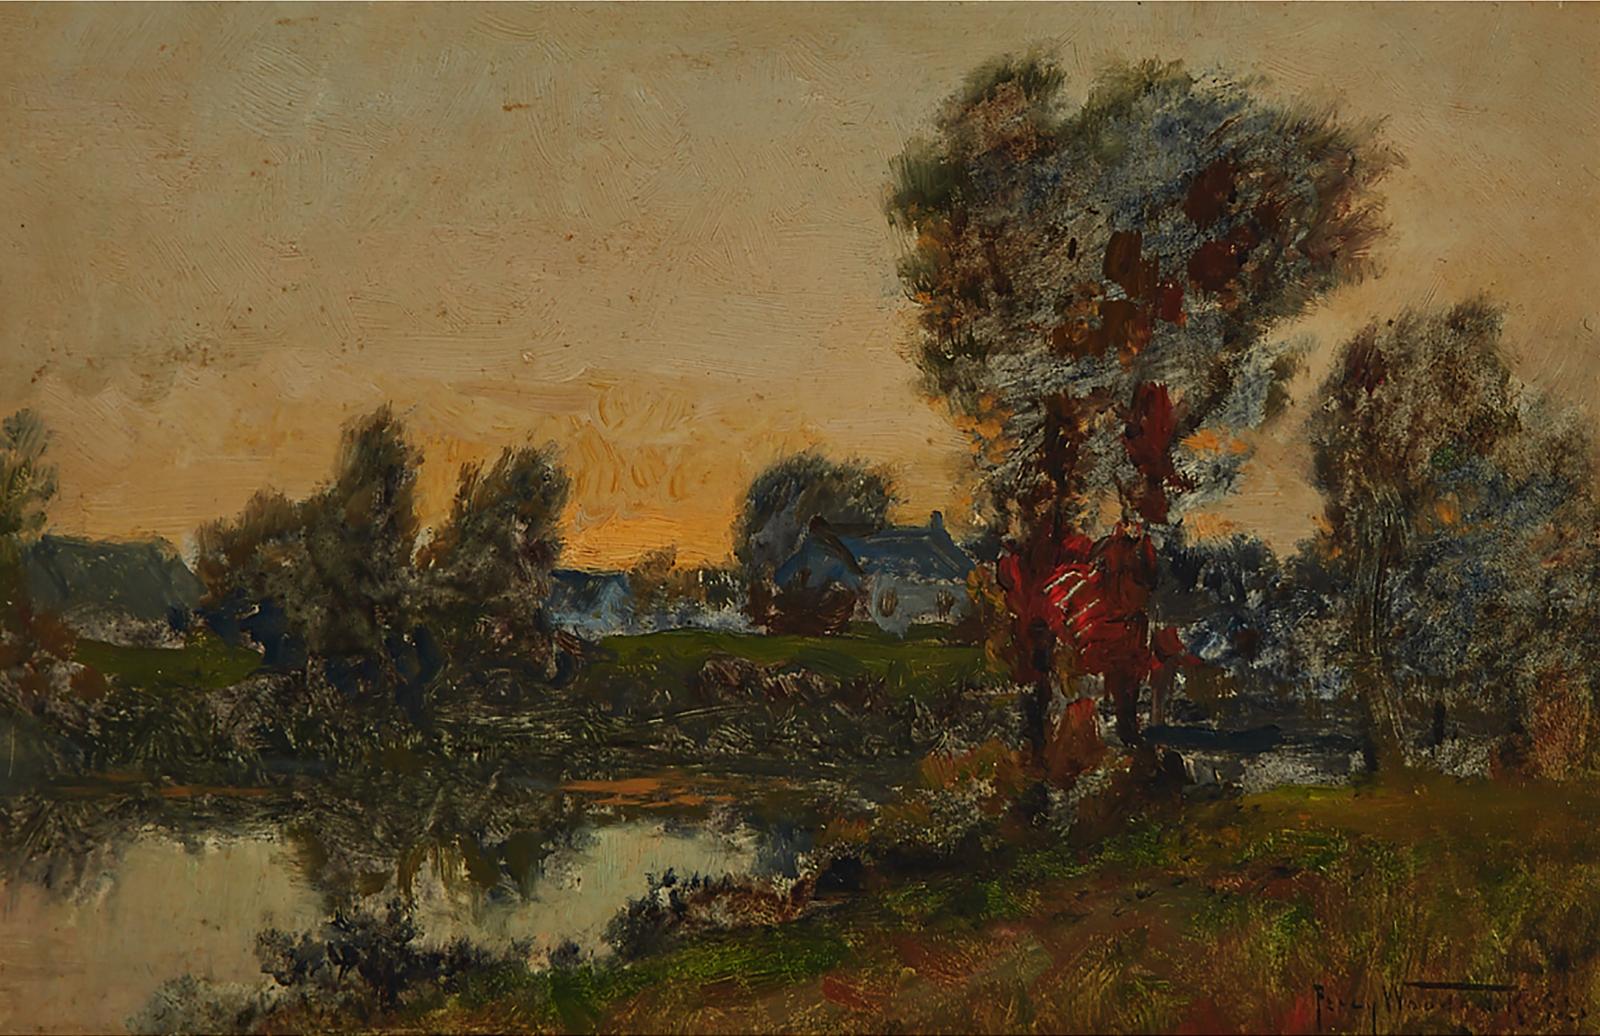 Percy Franklin Woodcock (1855-1936) - House By A River, 1892